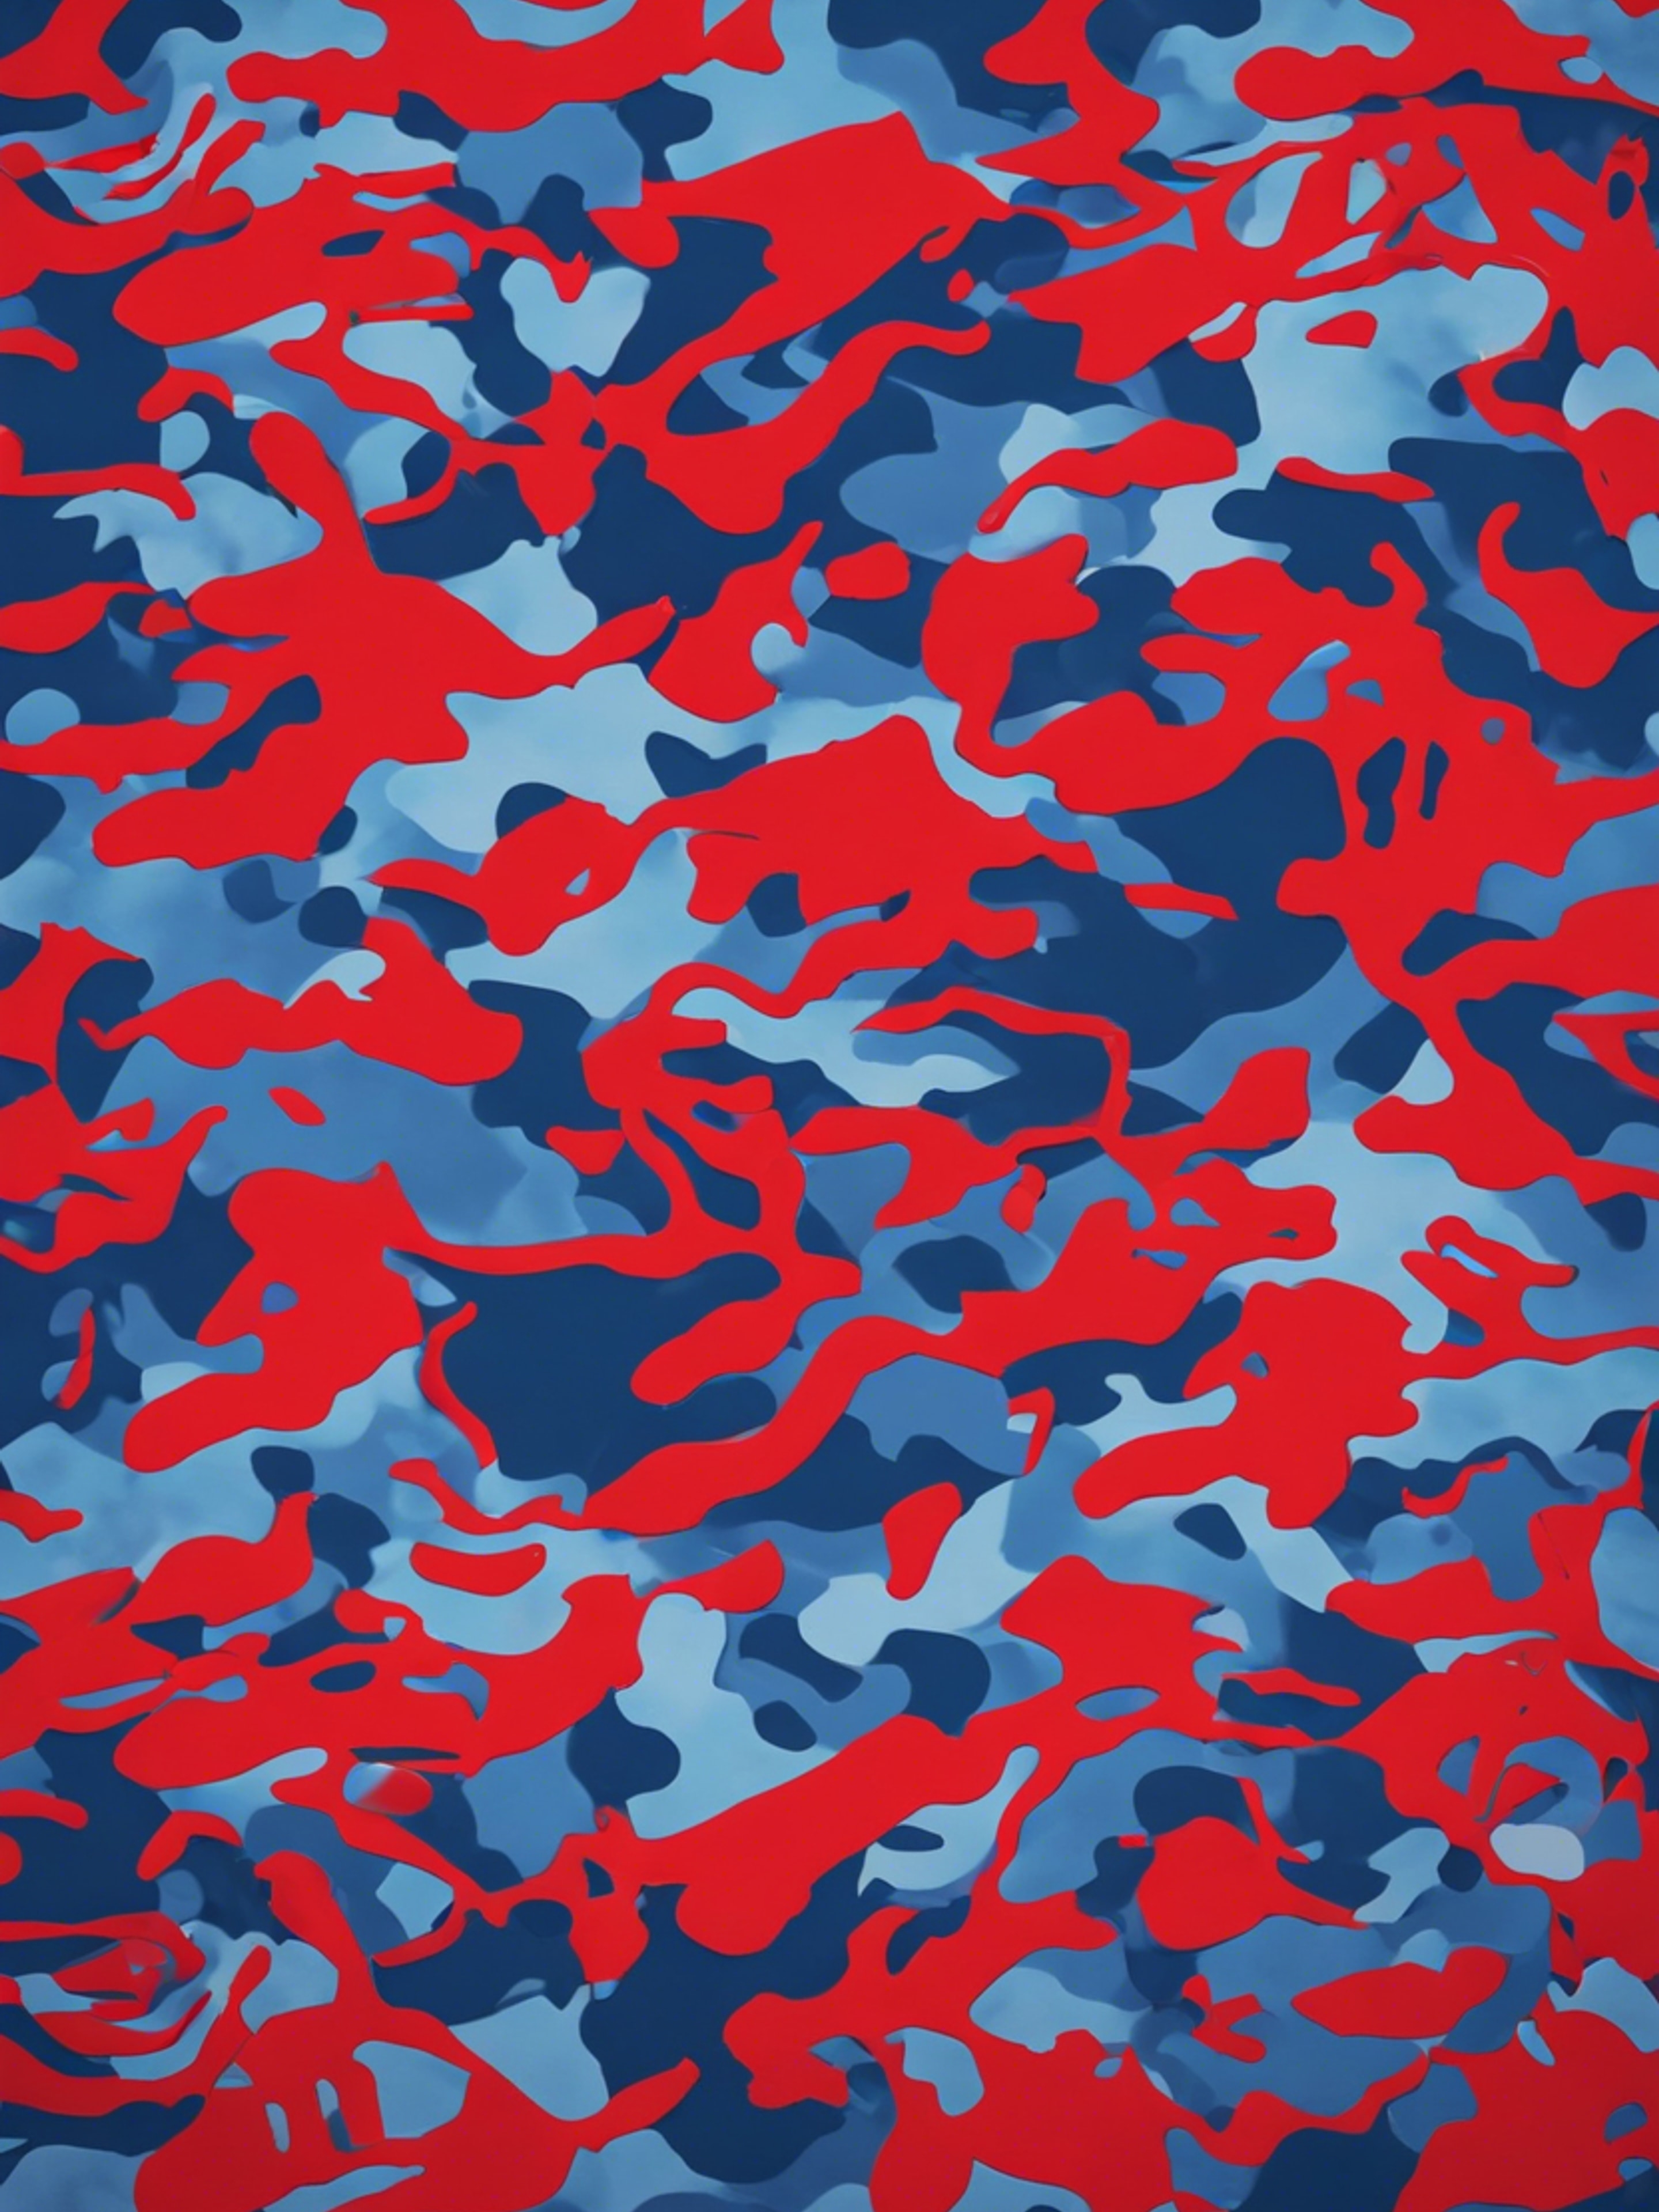 Vintage styled red and blue camouflage pattern.壁紙[fee228e6ab6649a28dfc]